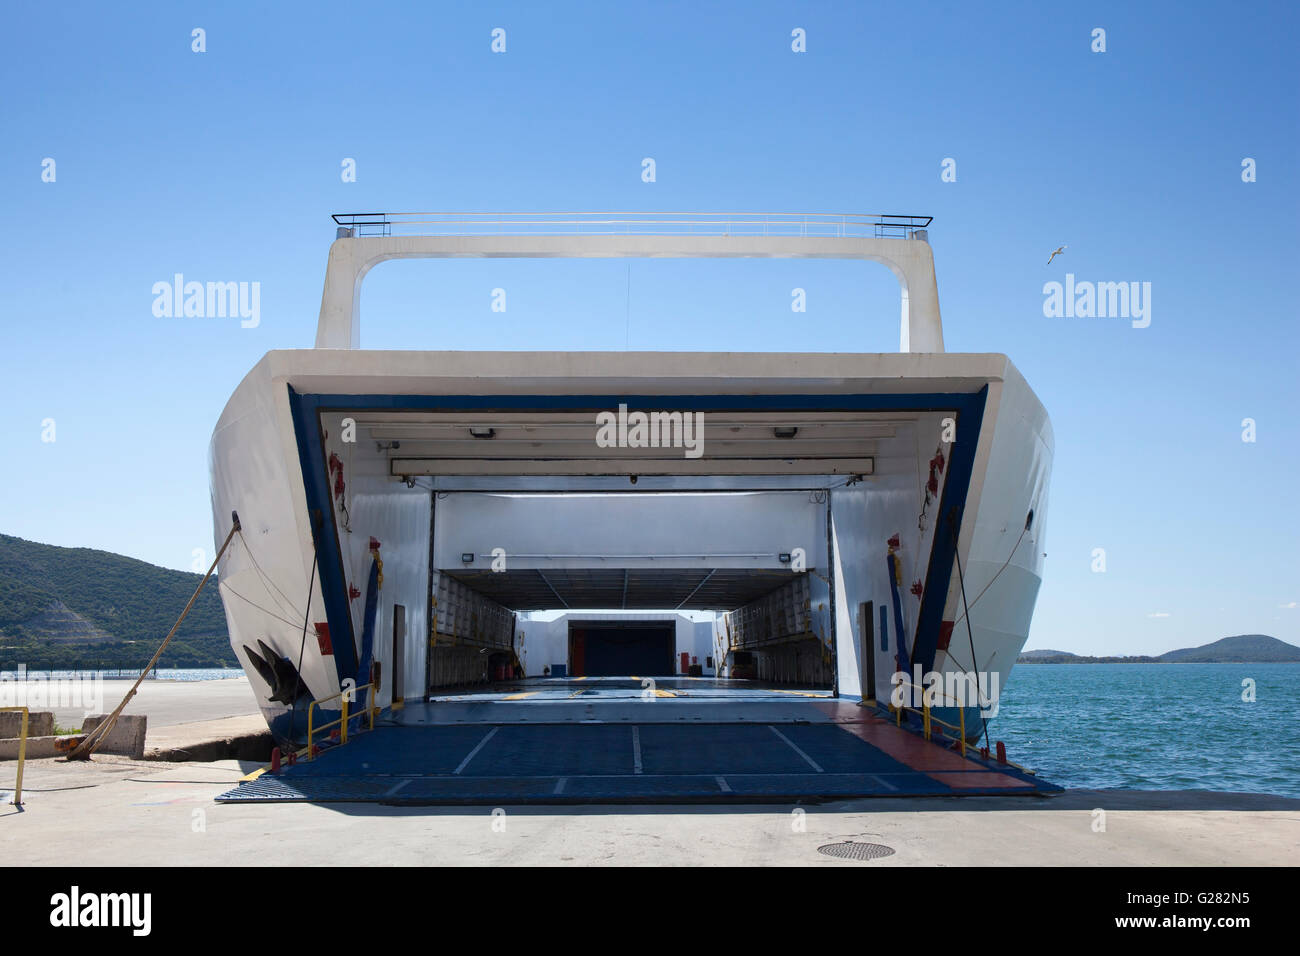 Big ship ferry boat waiting at a port to be loaded with vehicles and passengers. Stock Photo